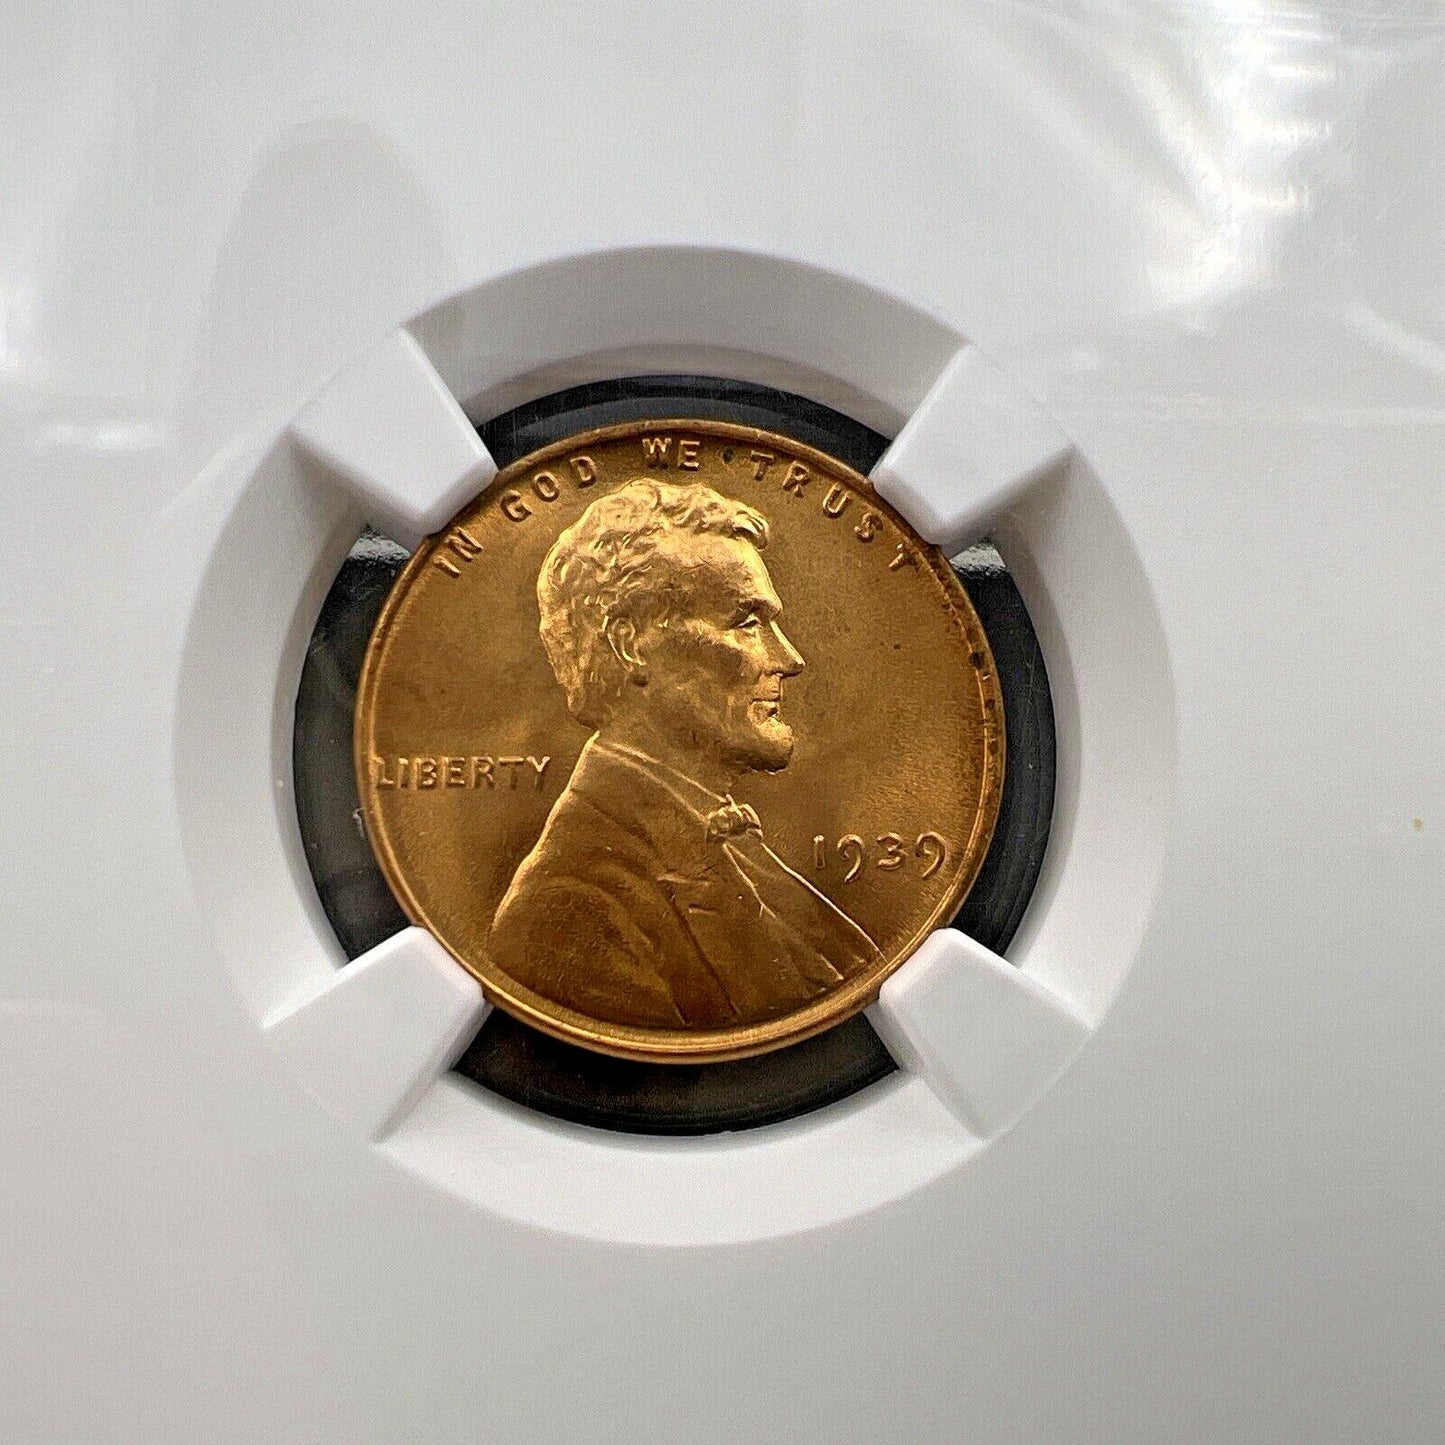 1939 P 1c Lincoln Wheat Cent Penny Coin MS66 RD NGC Gem BU Ceritifed